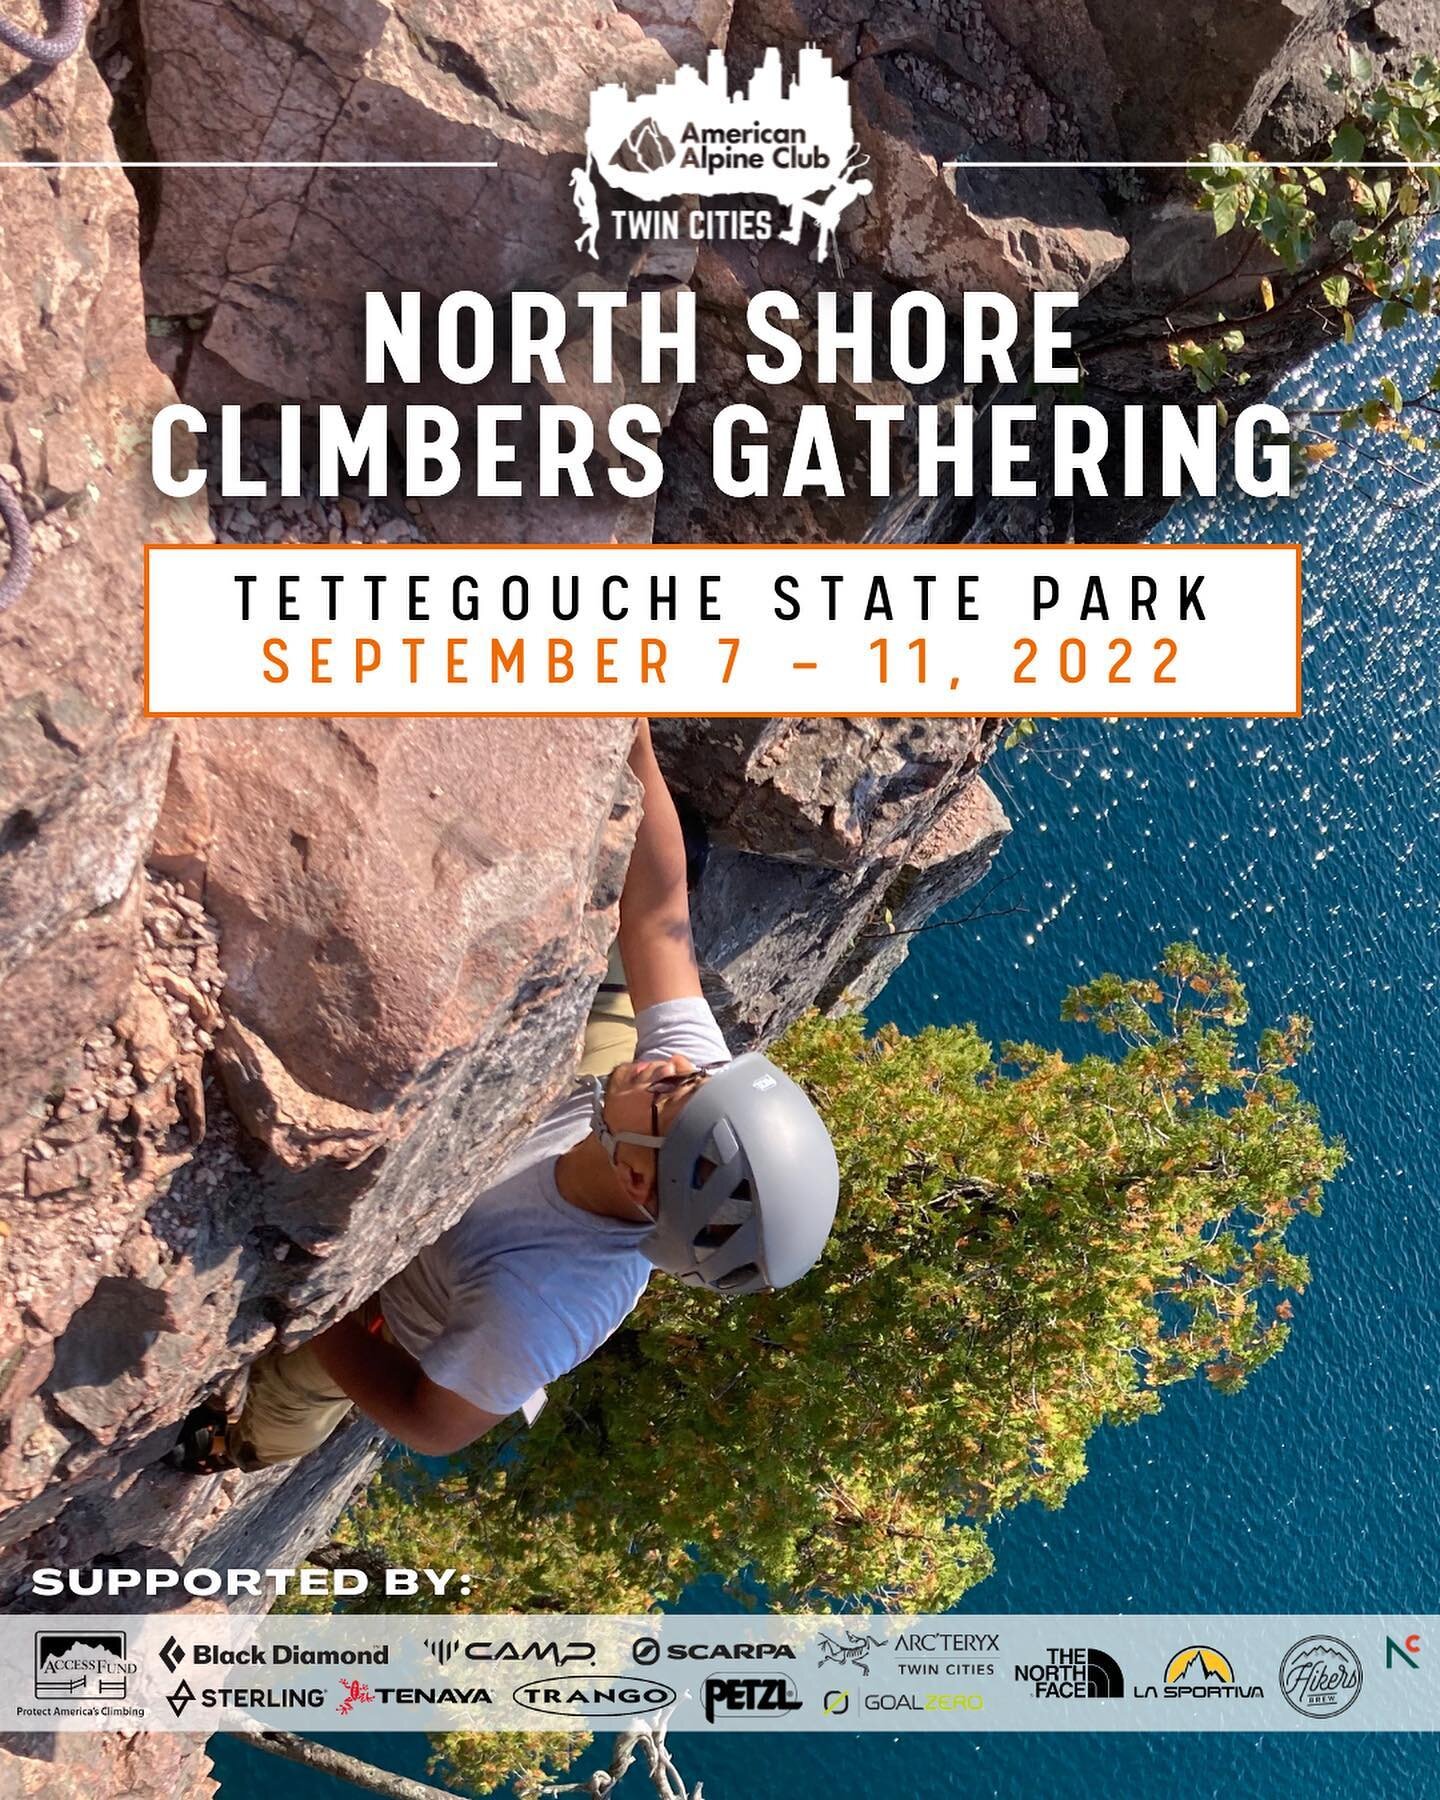 Register for a clinic at the 2022 North Shore Climbers Gathering! Join us from September 7&ndash;11 in Tettegouche State Park to get to know other climbers, build community, enjoy the outdoors together, and get more experience with climbing. Climbers